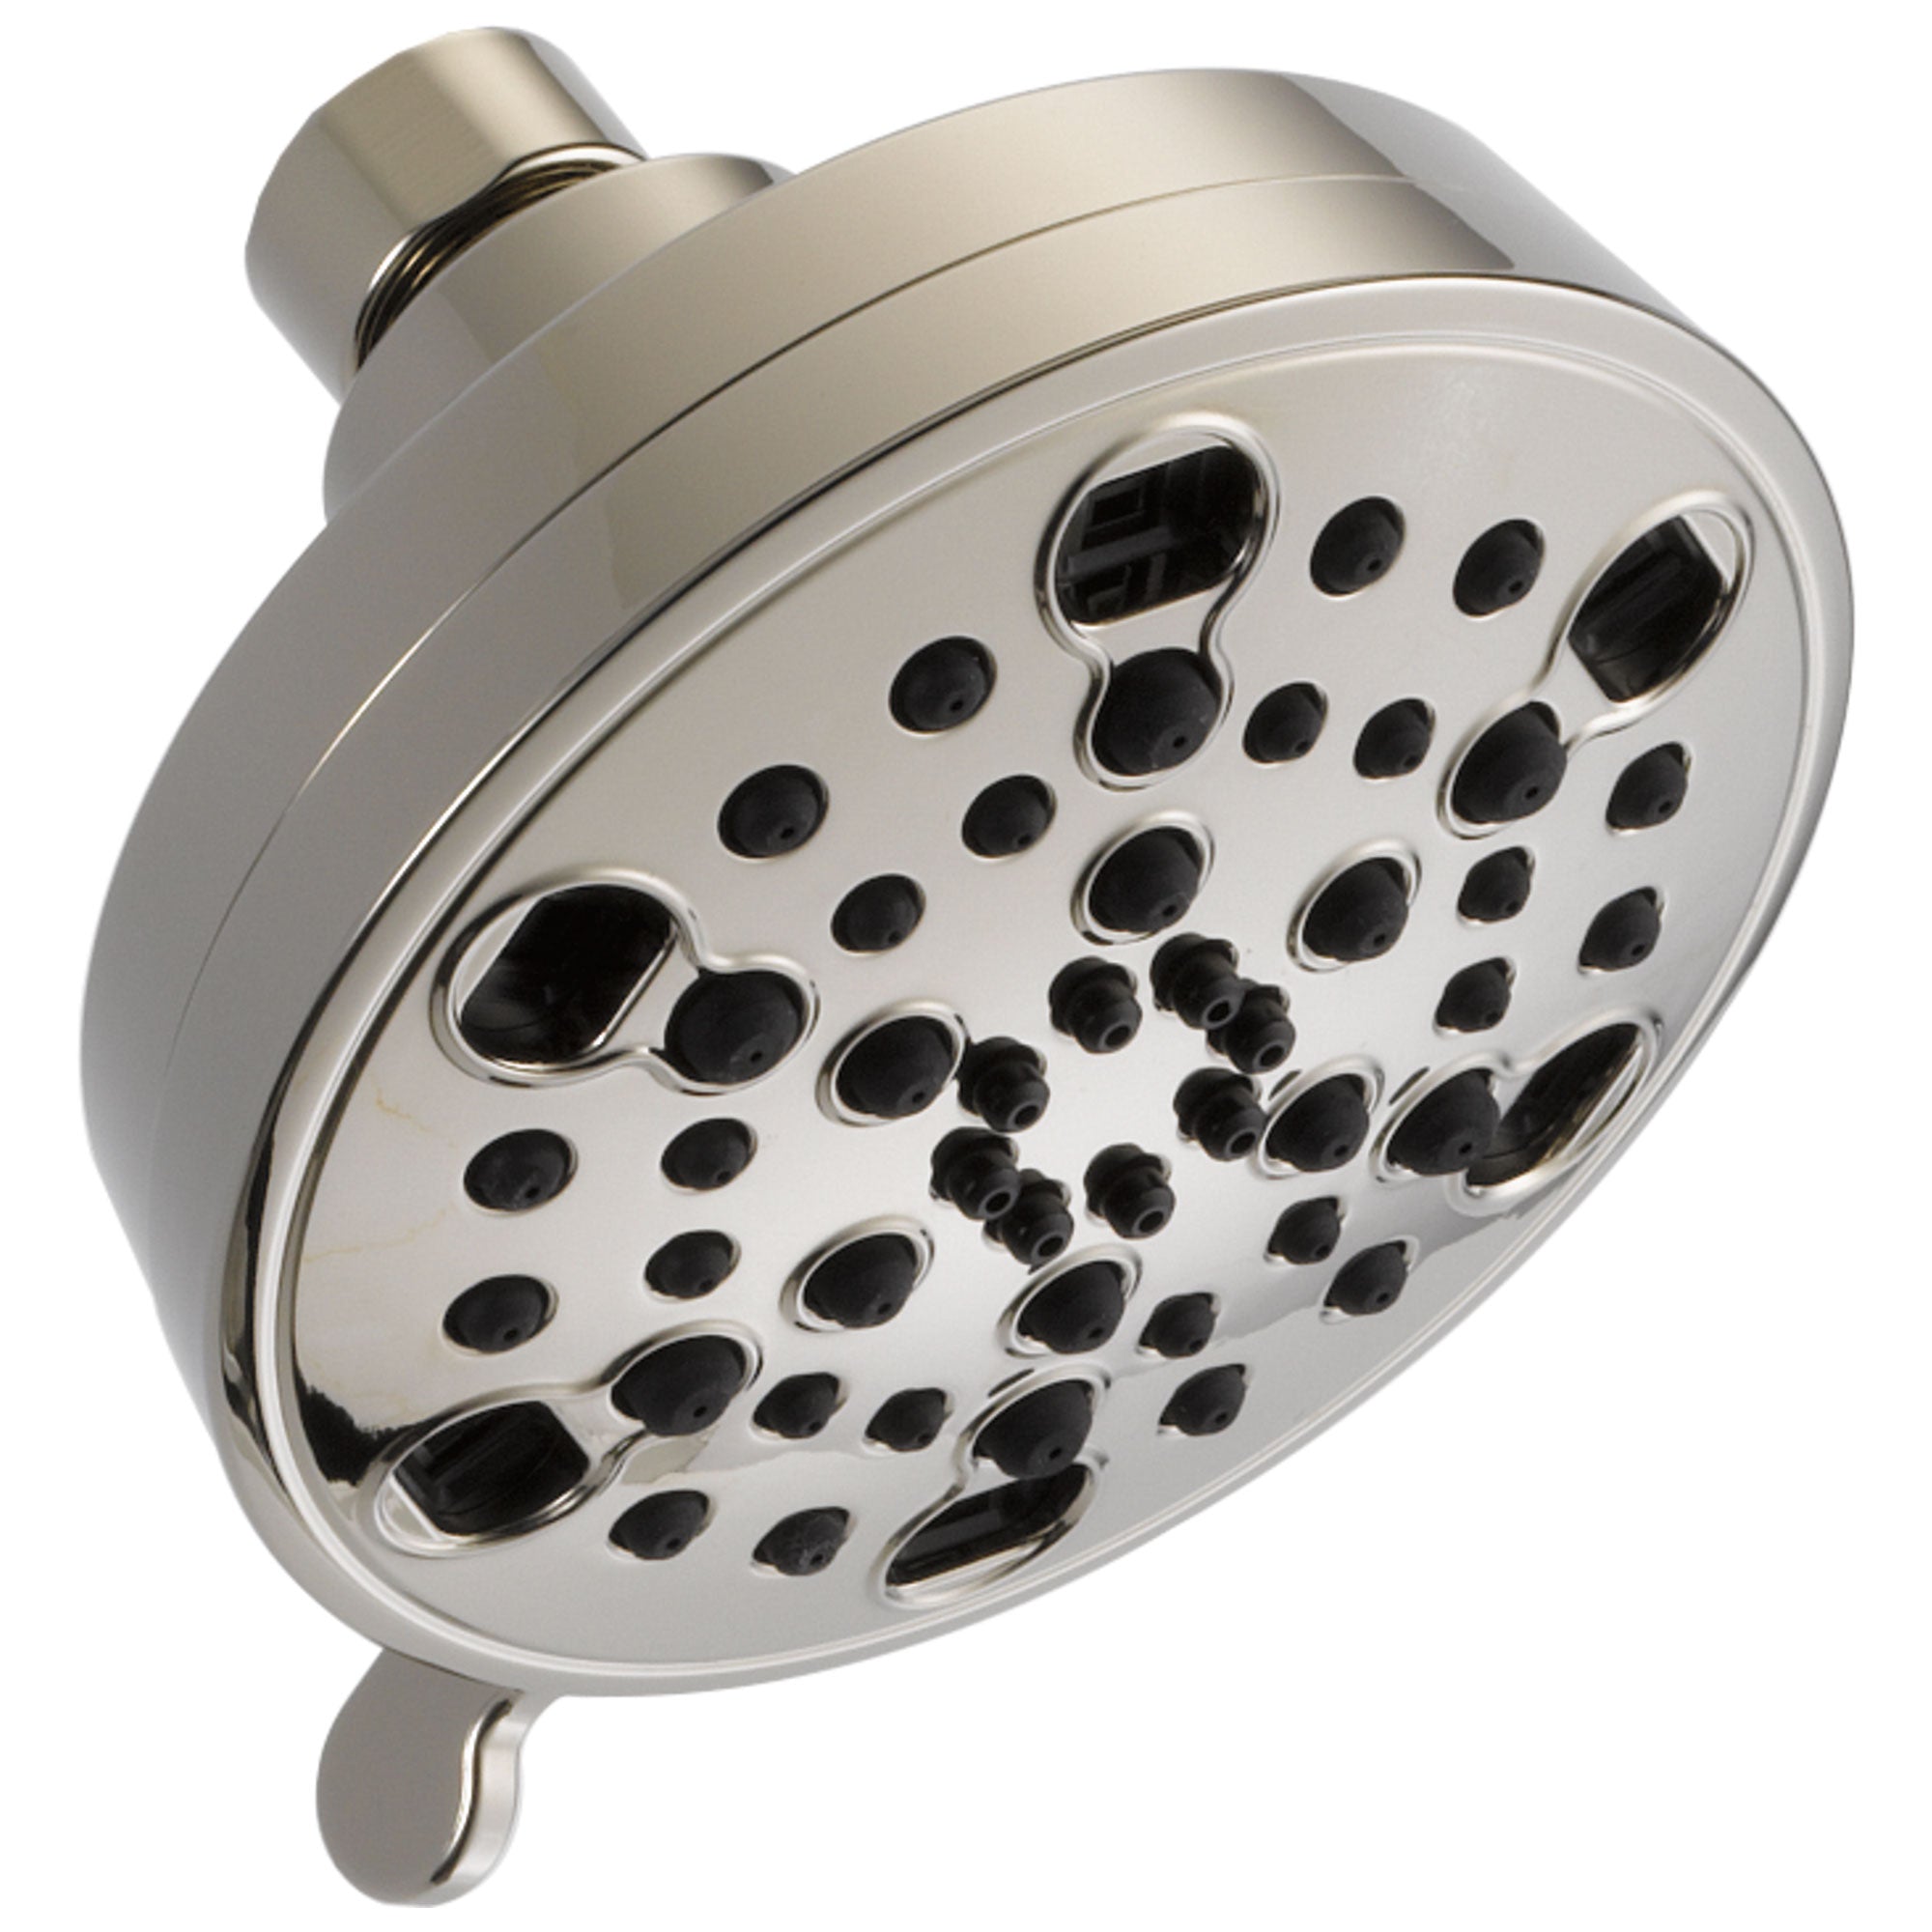 Delta Universal Showering Components Collection Polished Nickel Finish H2Okinetic 5-Setting Contemporary Shower Head D52638PN20PK